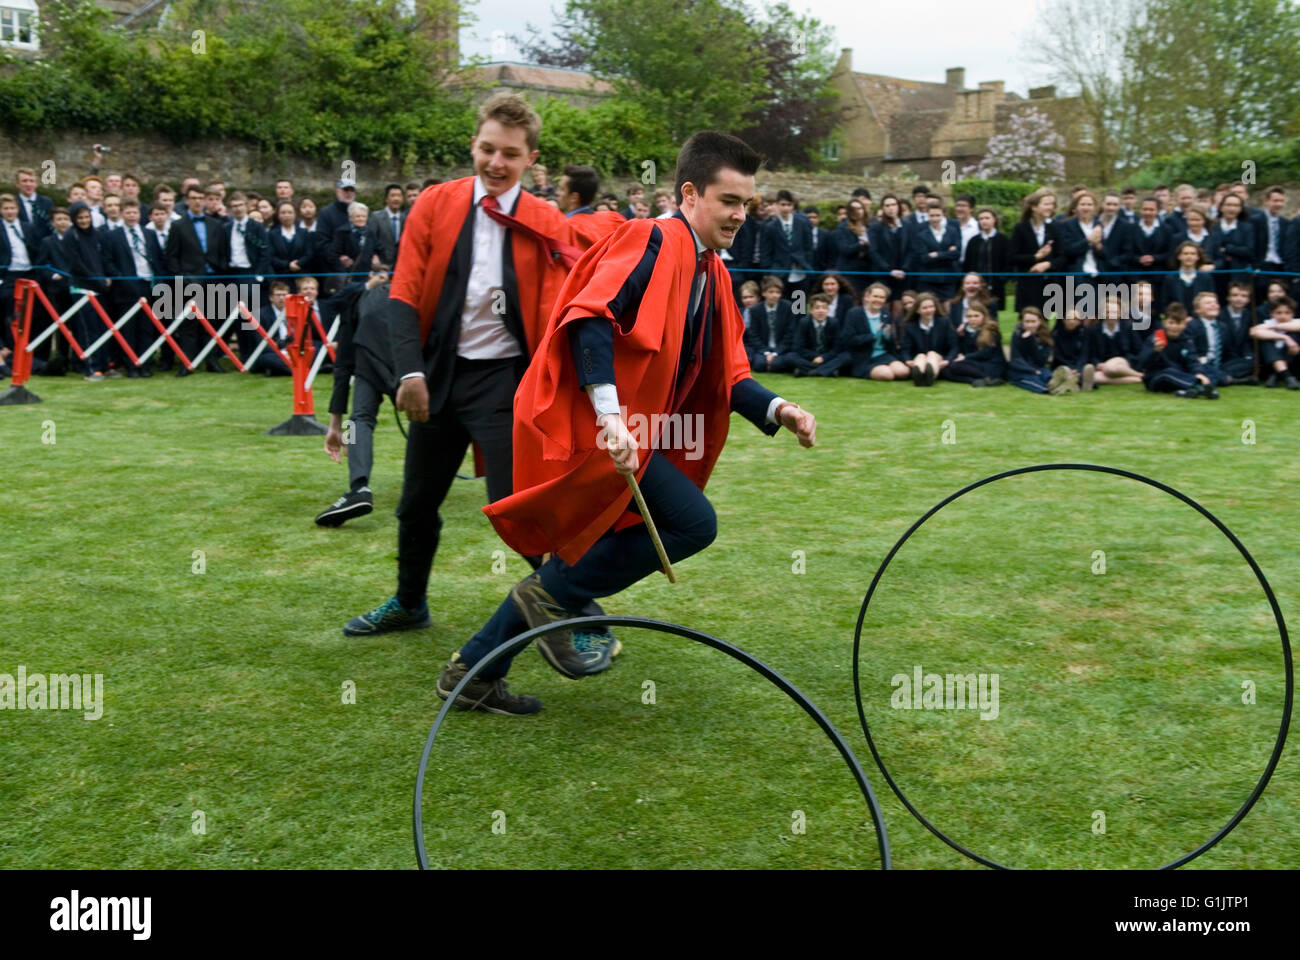 Tradition Hoop Trundle delle scuole pubbliche. La Kings School Ely. Ely Cathedral Grounds Private Education EnglandUK 2016 2010s HOMER SYKES Foto Stock